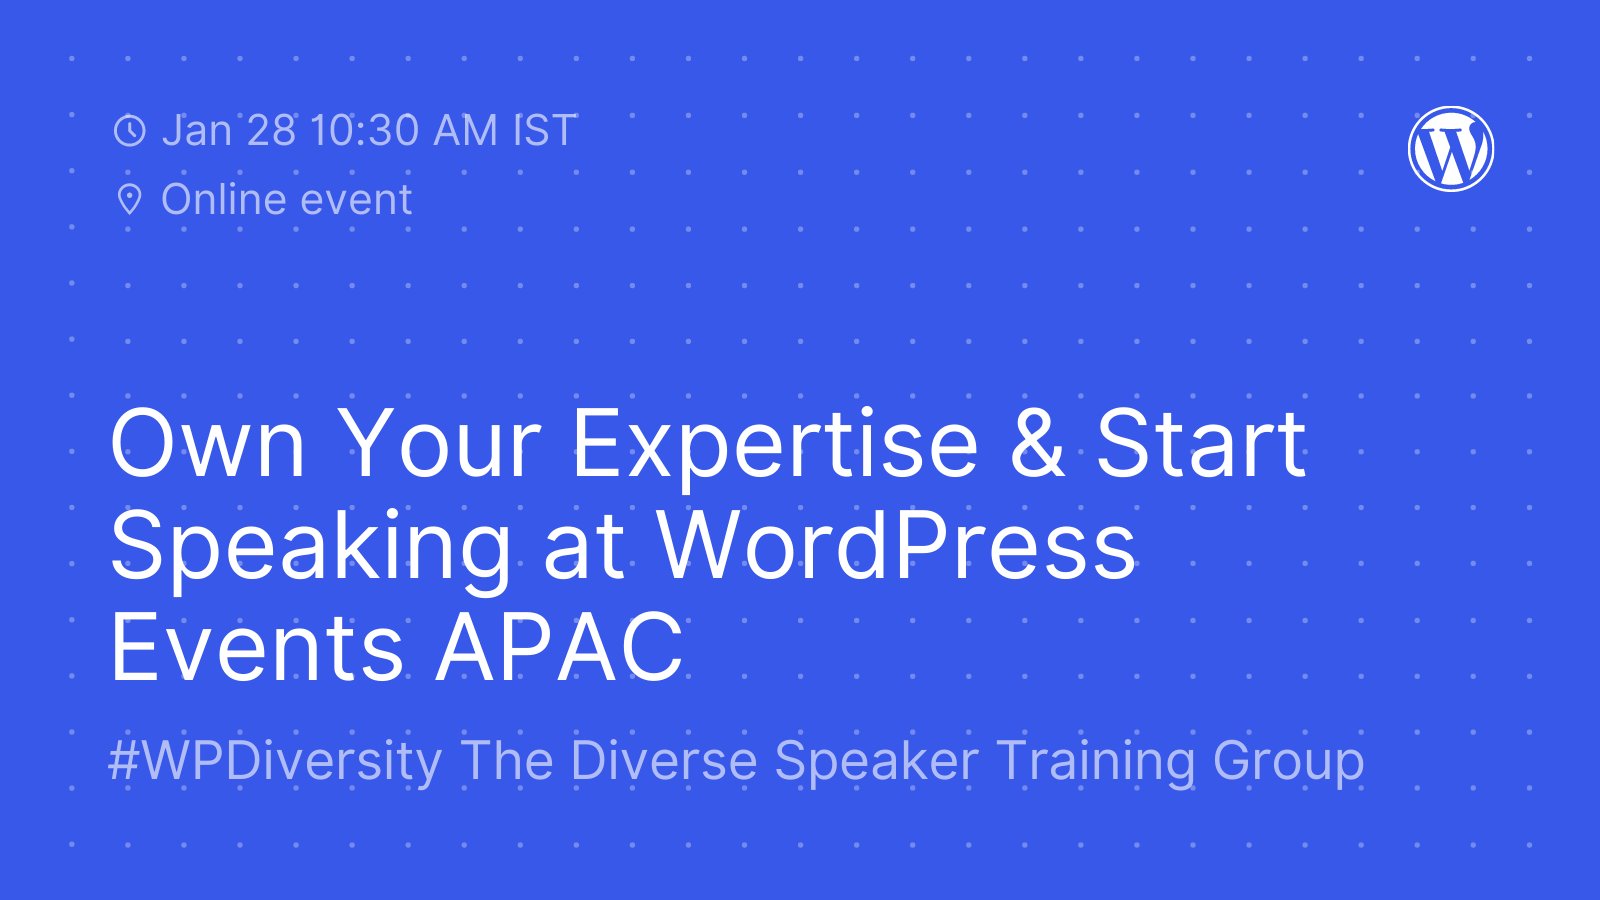 Dark blue background with light blue dot detail and text, "Own Your Expertise & Start Speaking at WordPress Events APAC. #WPDiversity Diverse Speaker Training Group. Jan 28 10:30AM IST. Online event."